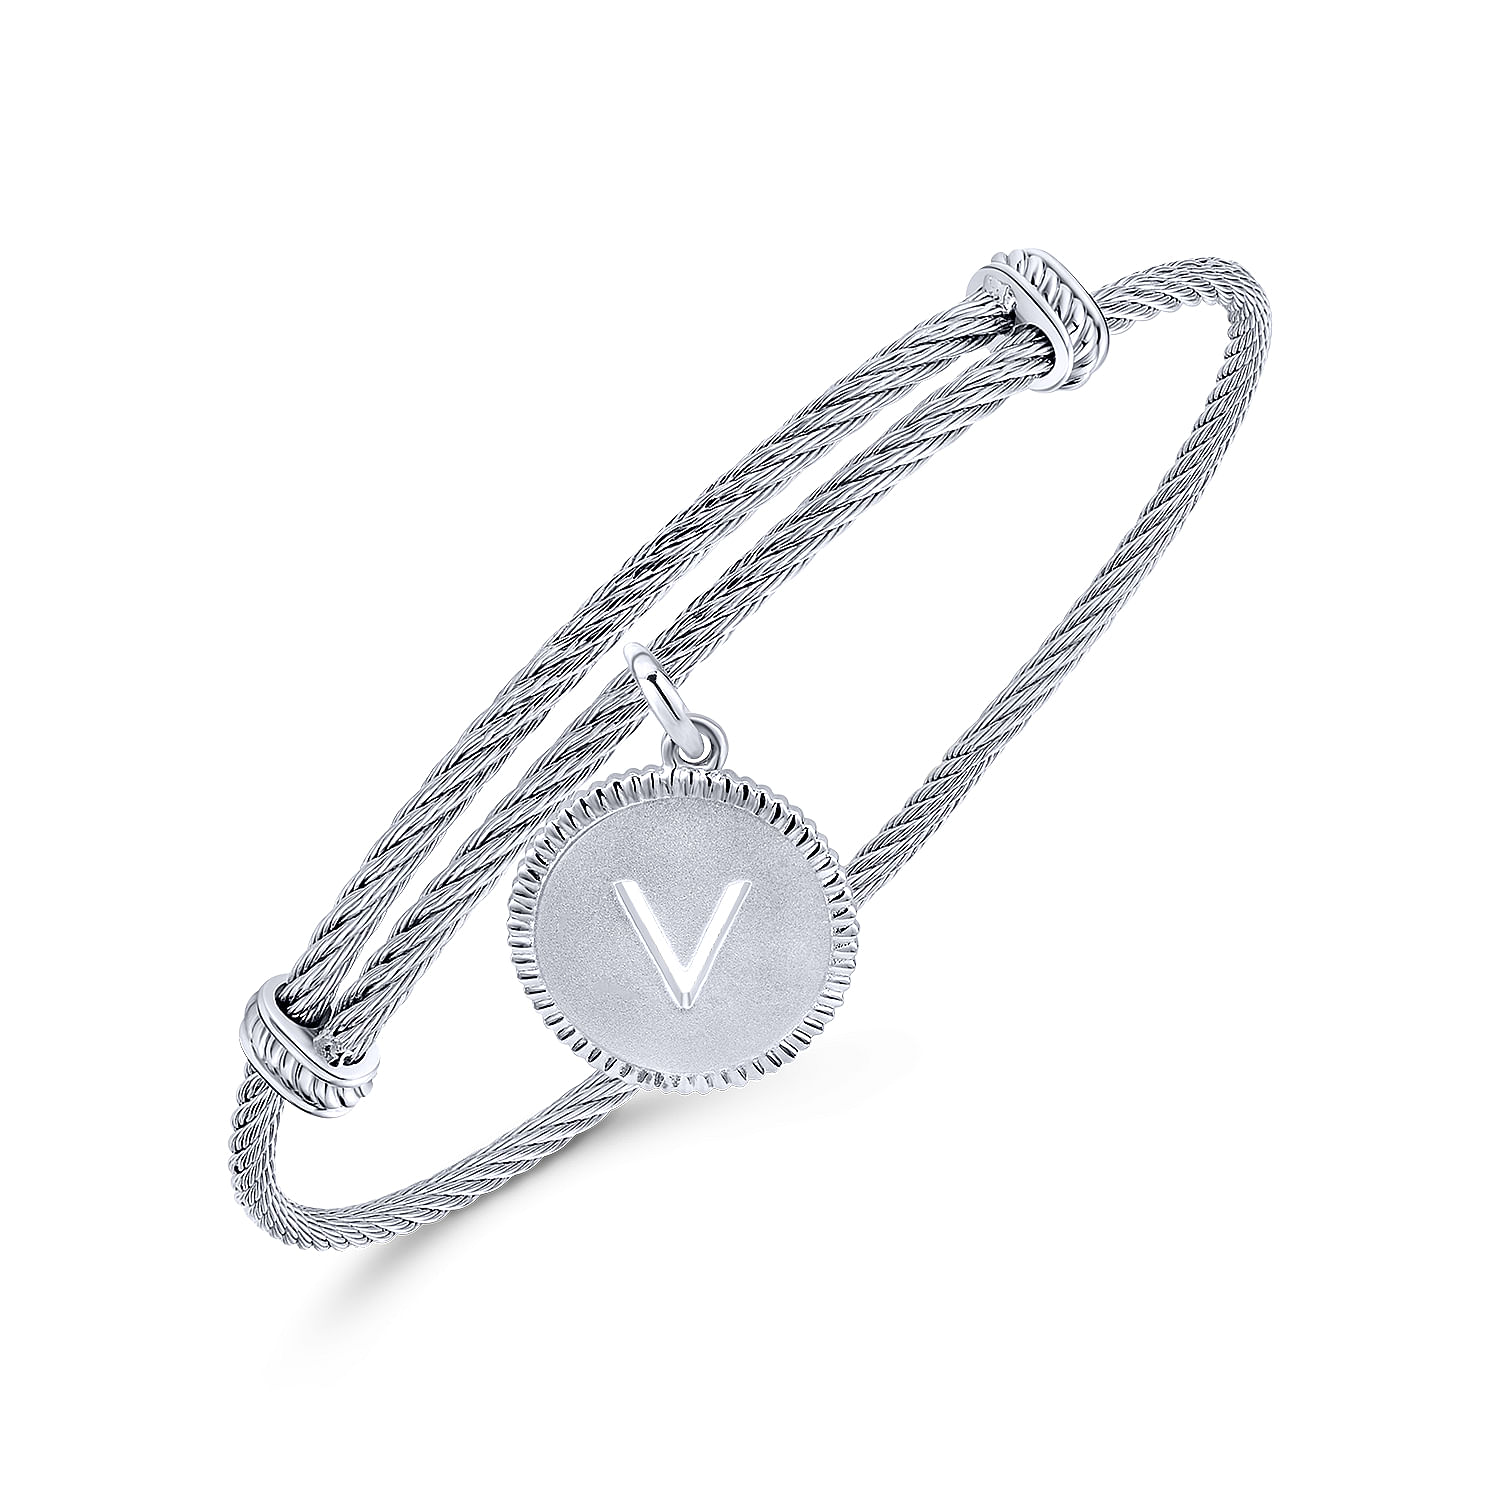 Adjustable-Twisted-Cable-Stainless-Steel-Bangle-with-Sterling-Silver-V-Initial-Charm2